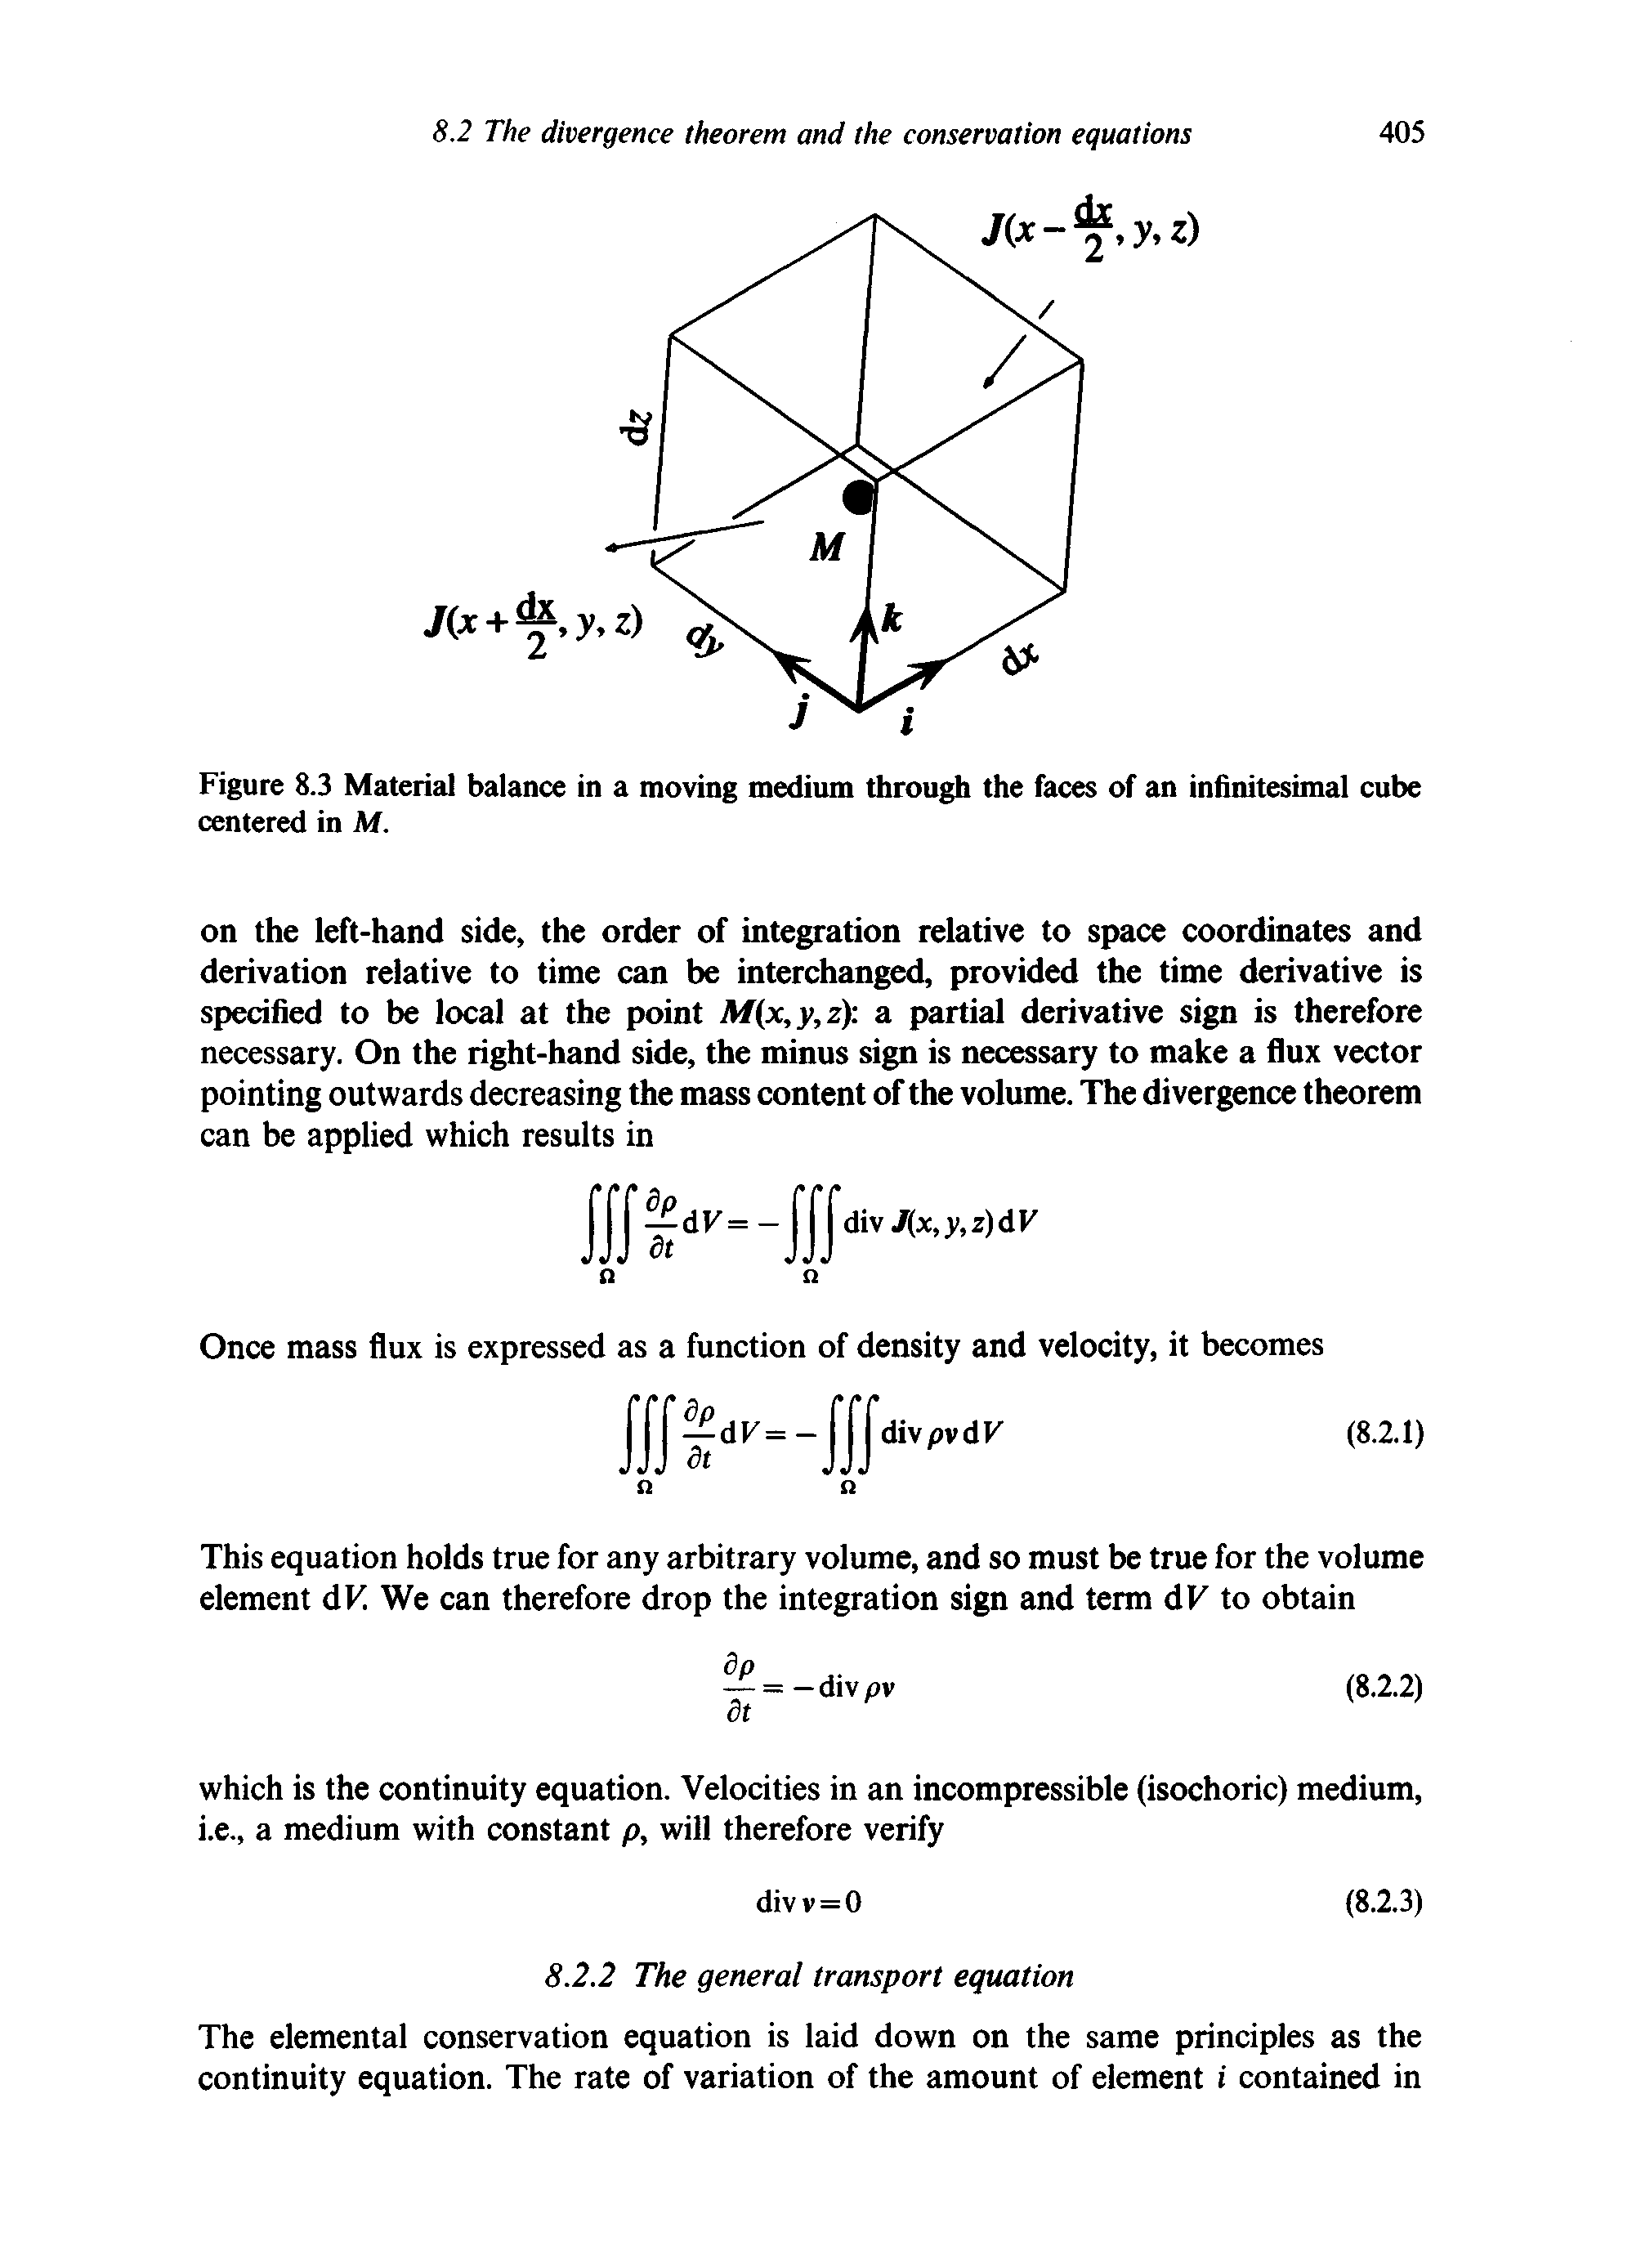 Figure 8.3 Material balance in a moving medium through the faces of an infinitesimal cube centered in M.